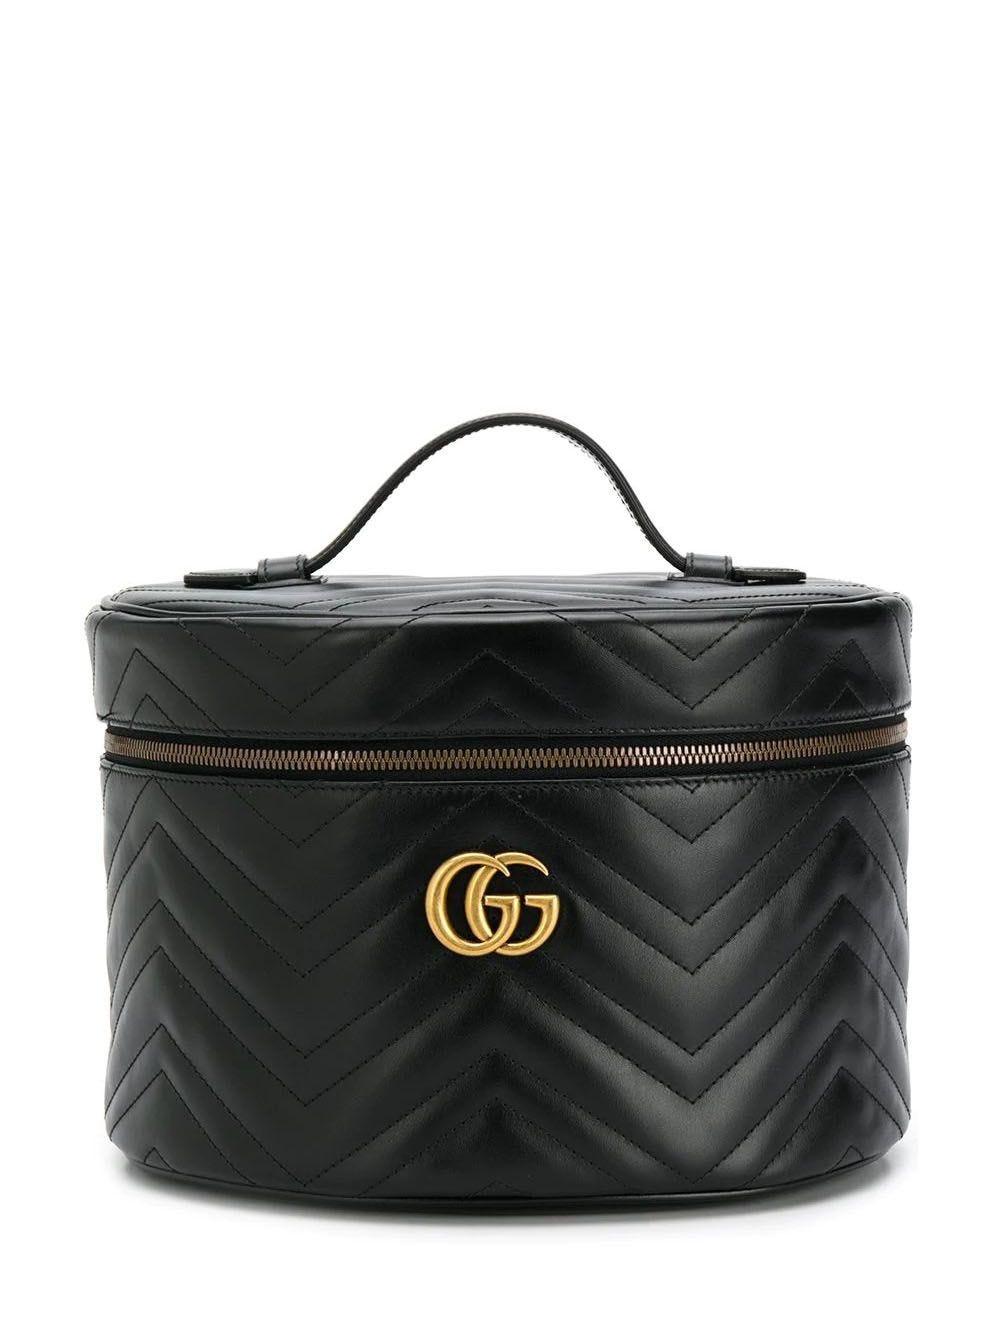 Gucci gg Marmont Cosmetic Case in Black | Lyst